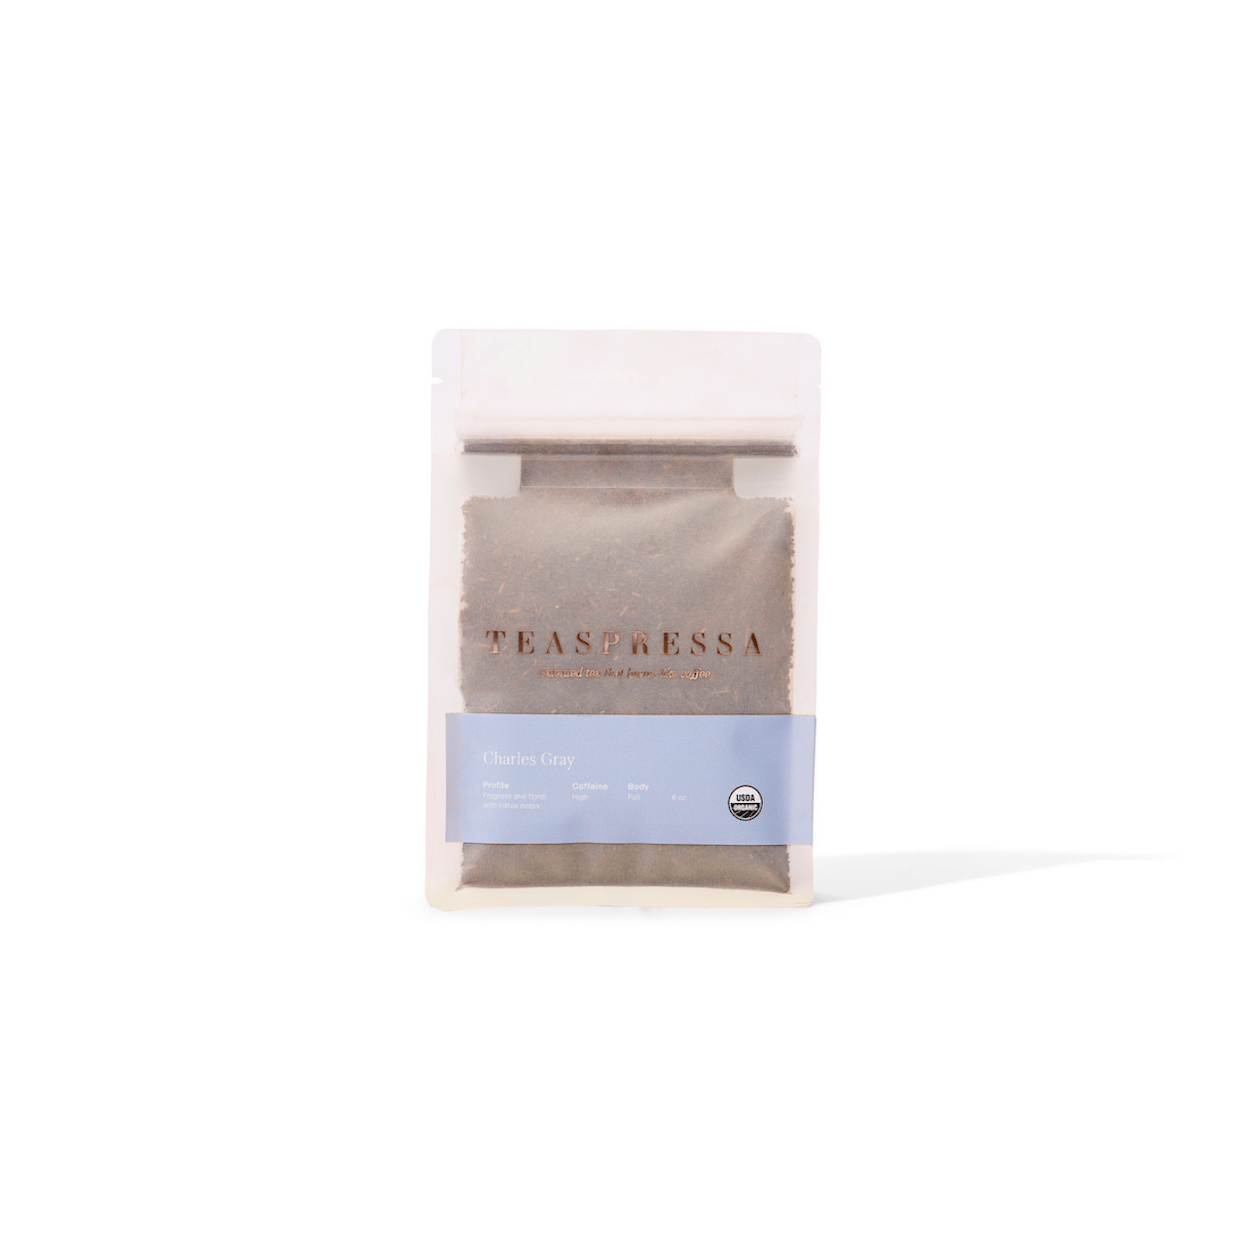 CHARLES GREY | Wholesale Tea Pouch (Case of 6, $11.50 each)